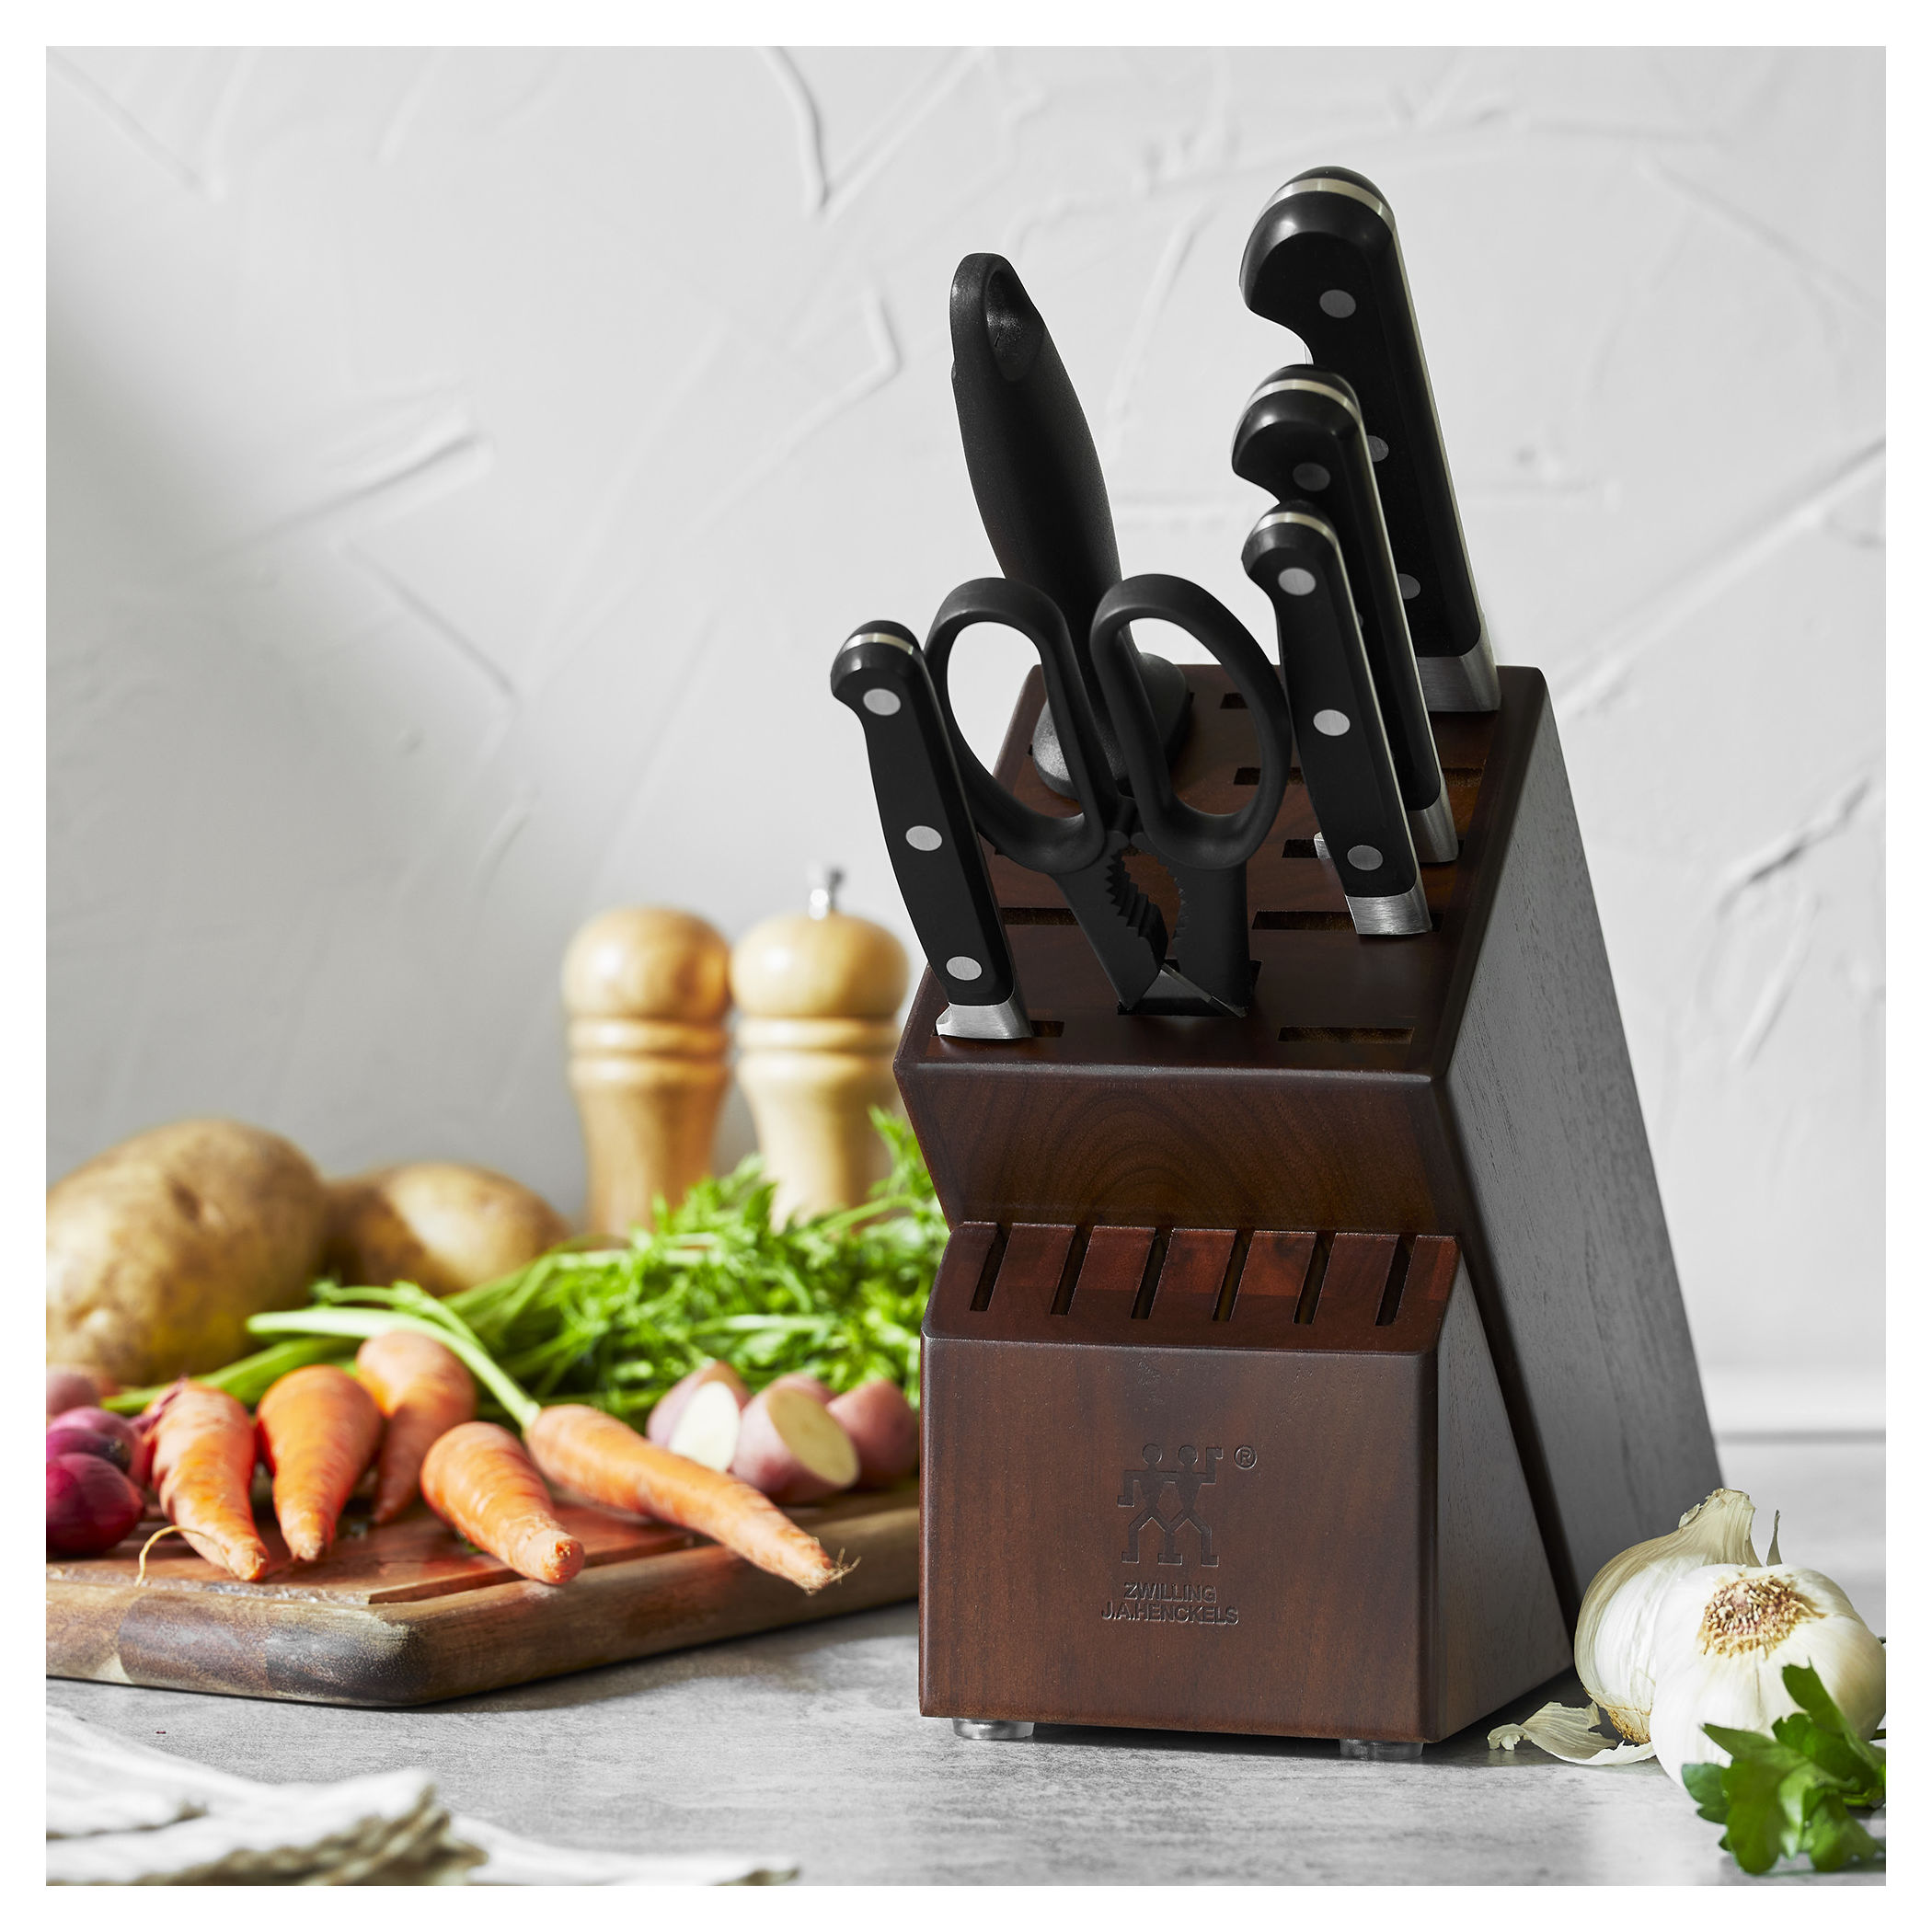 ZWILLING Professional S 7-pc Knife Block Set - Rustic White, 7-pc